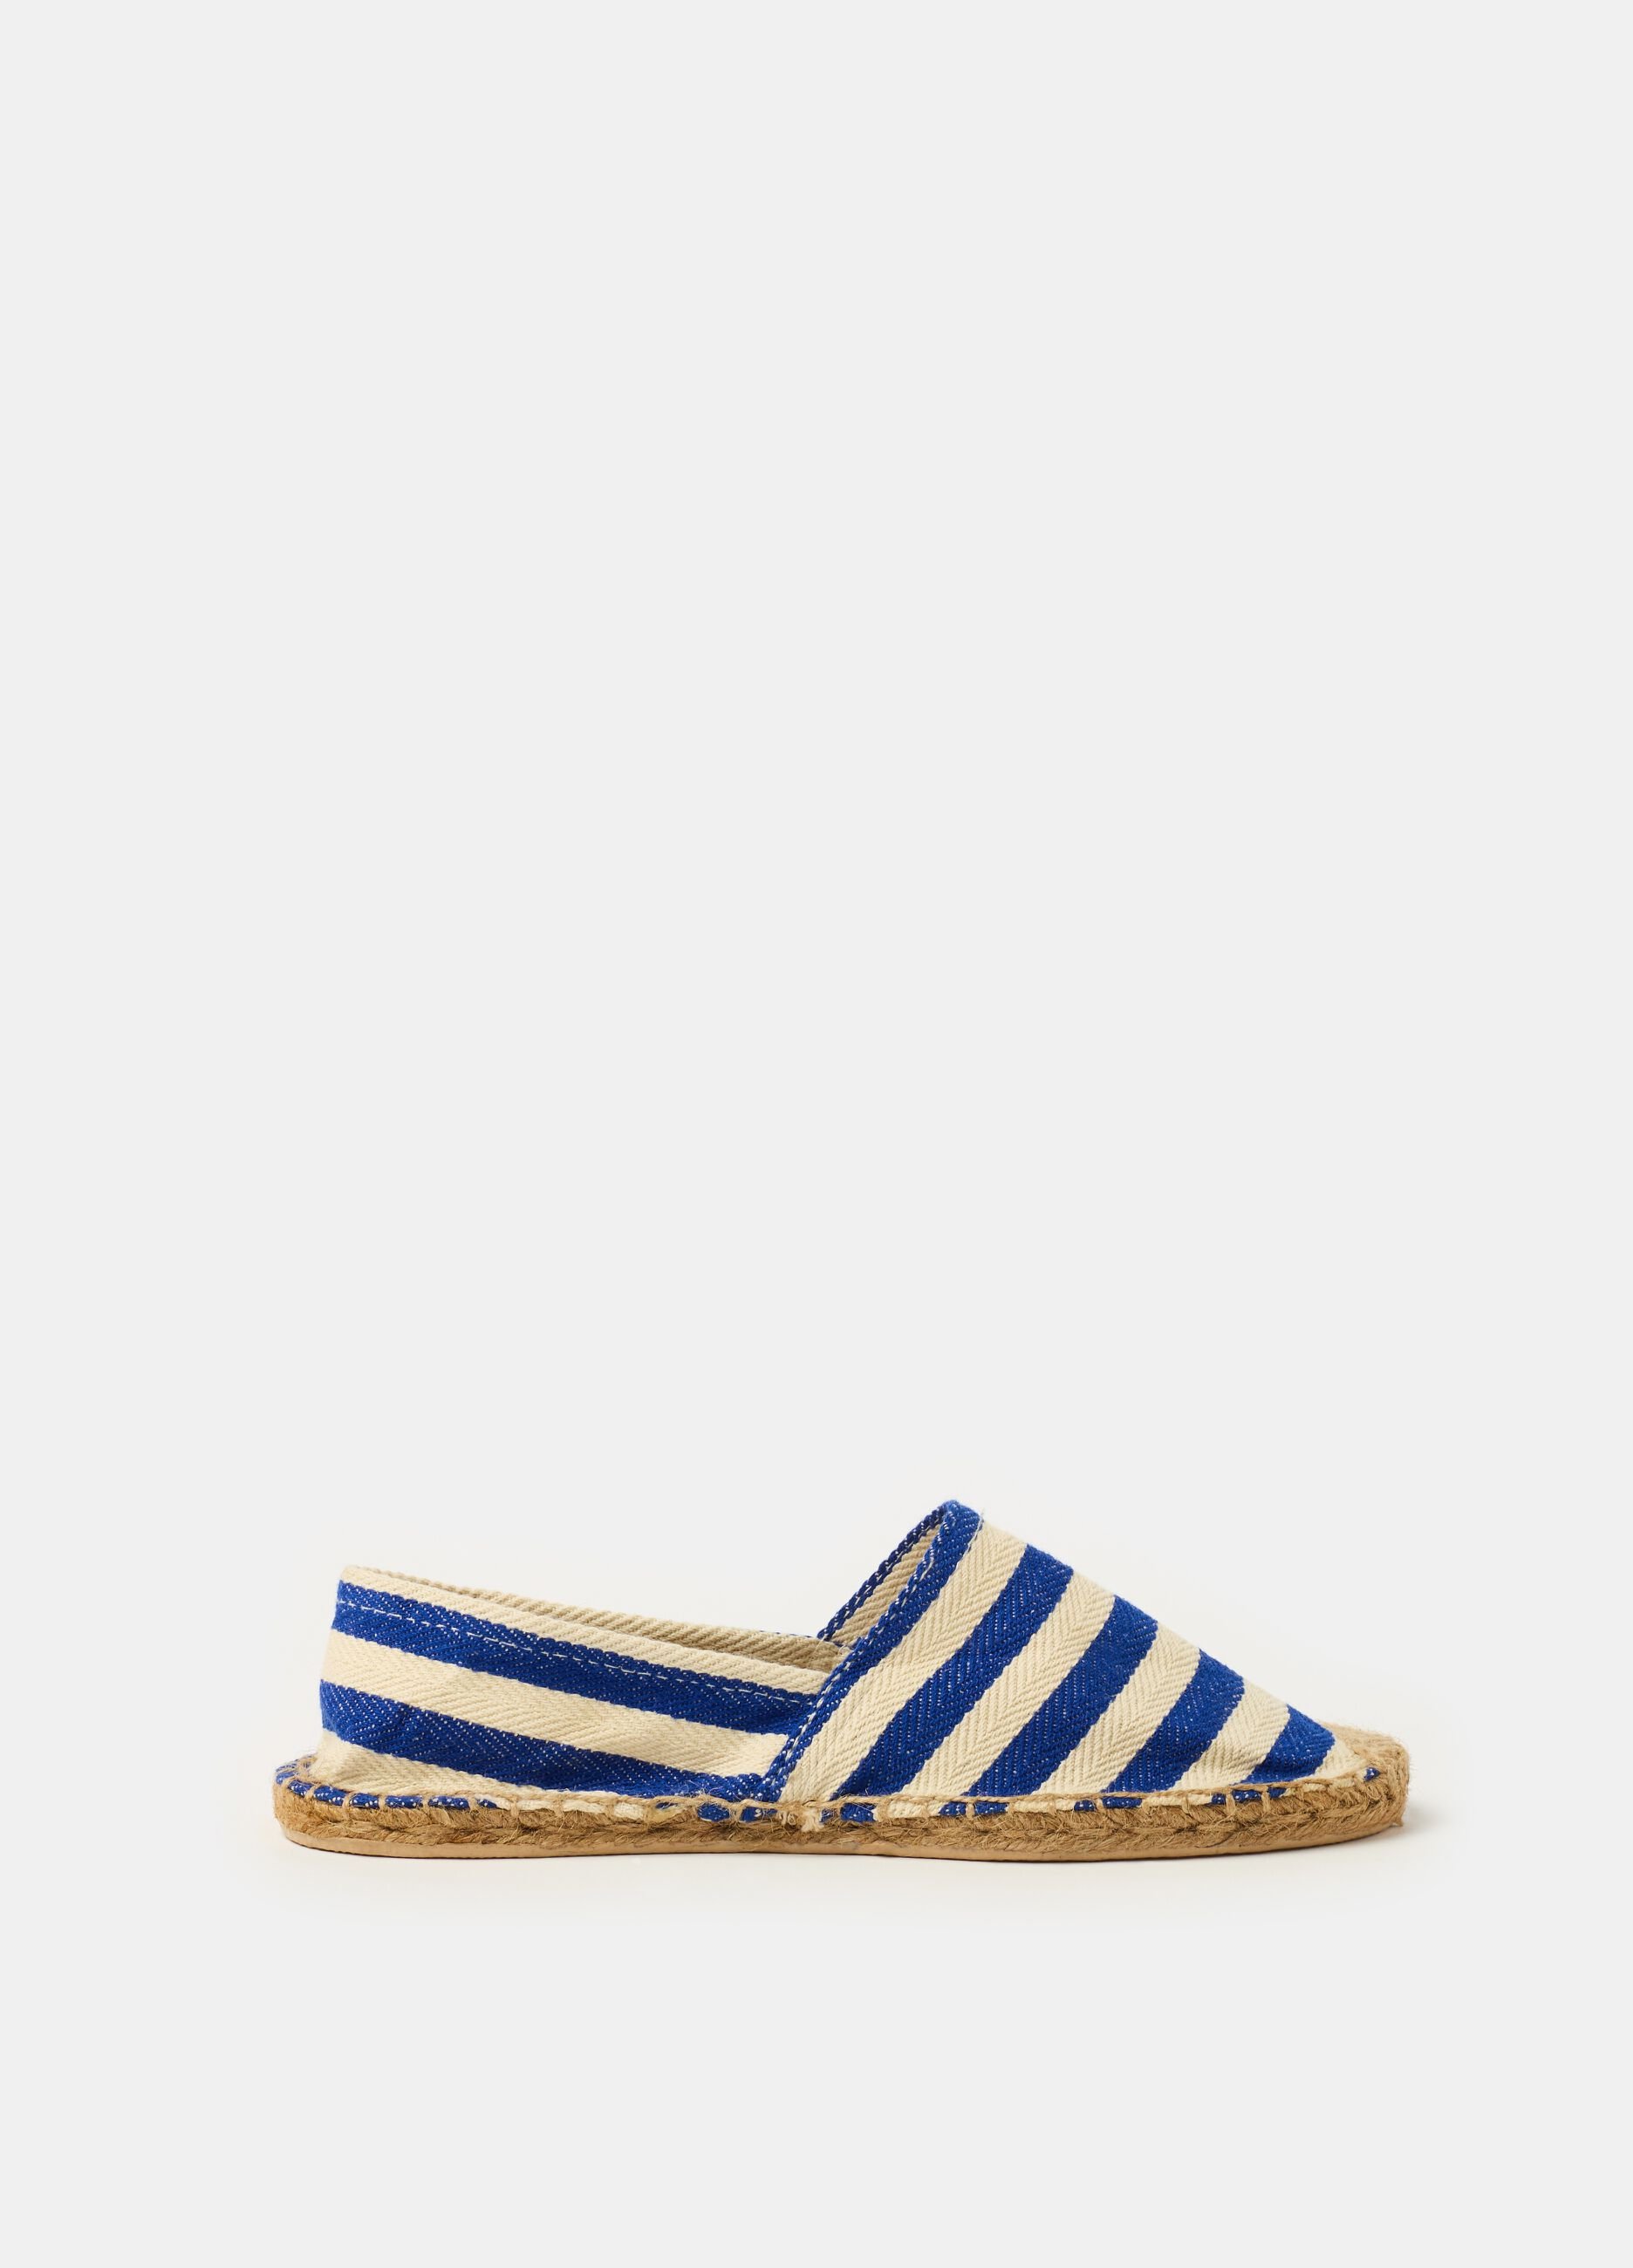 Espadrilles with striped pattern